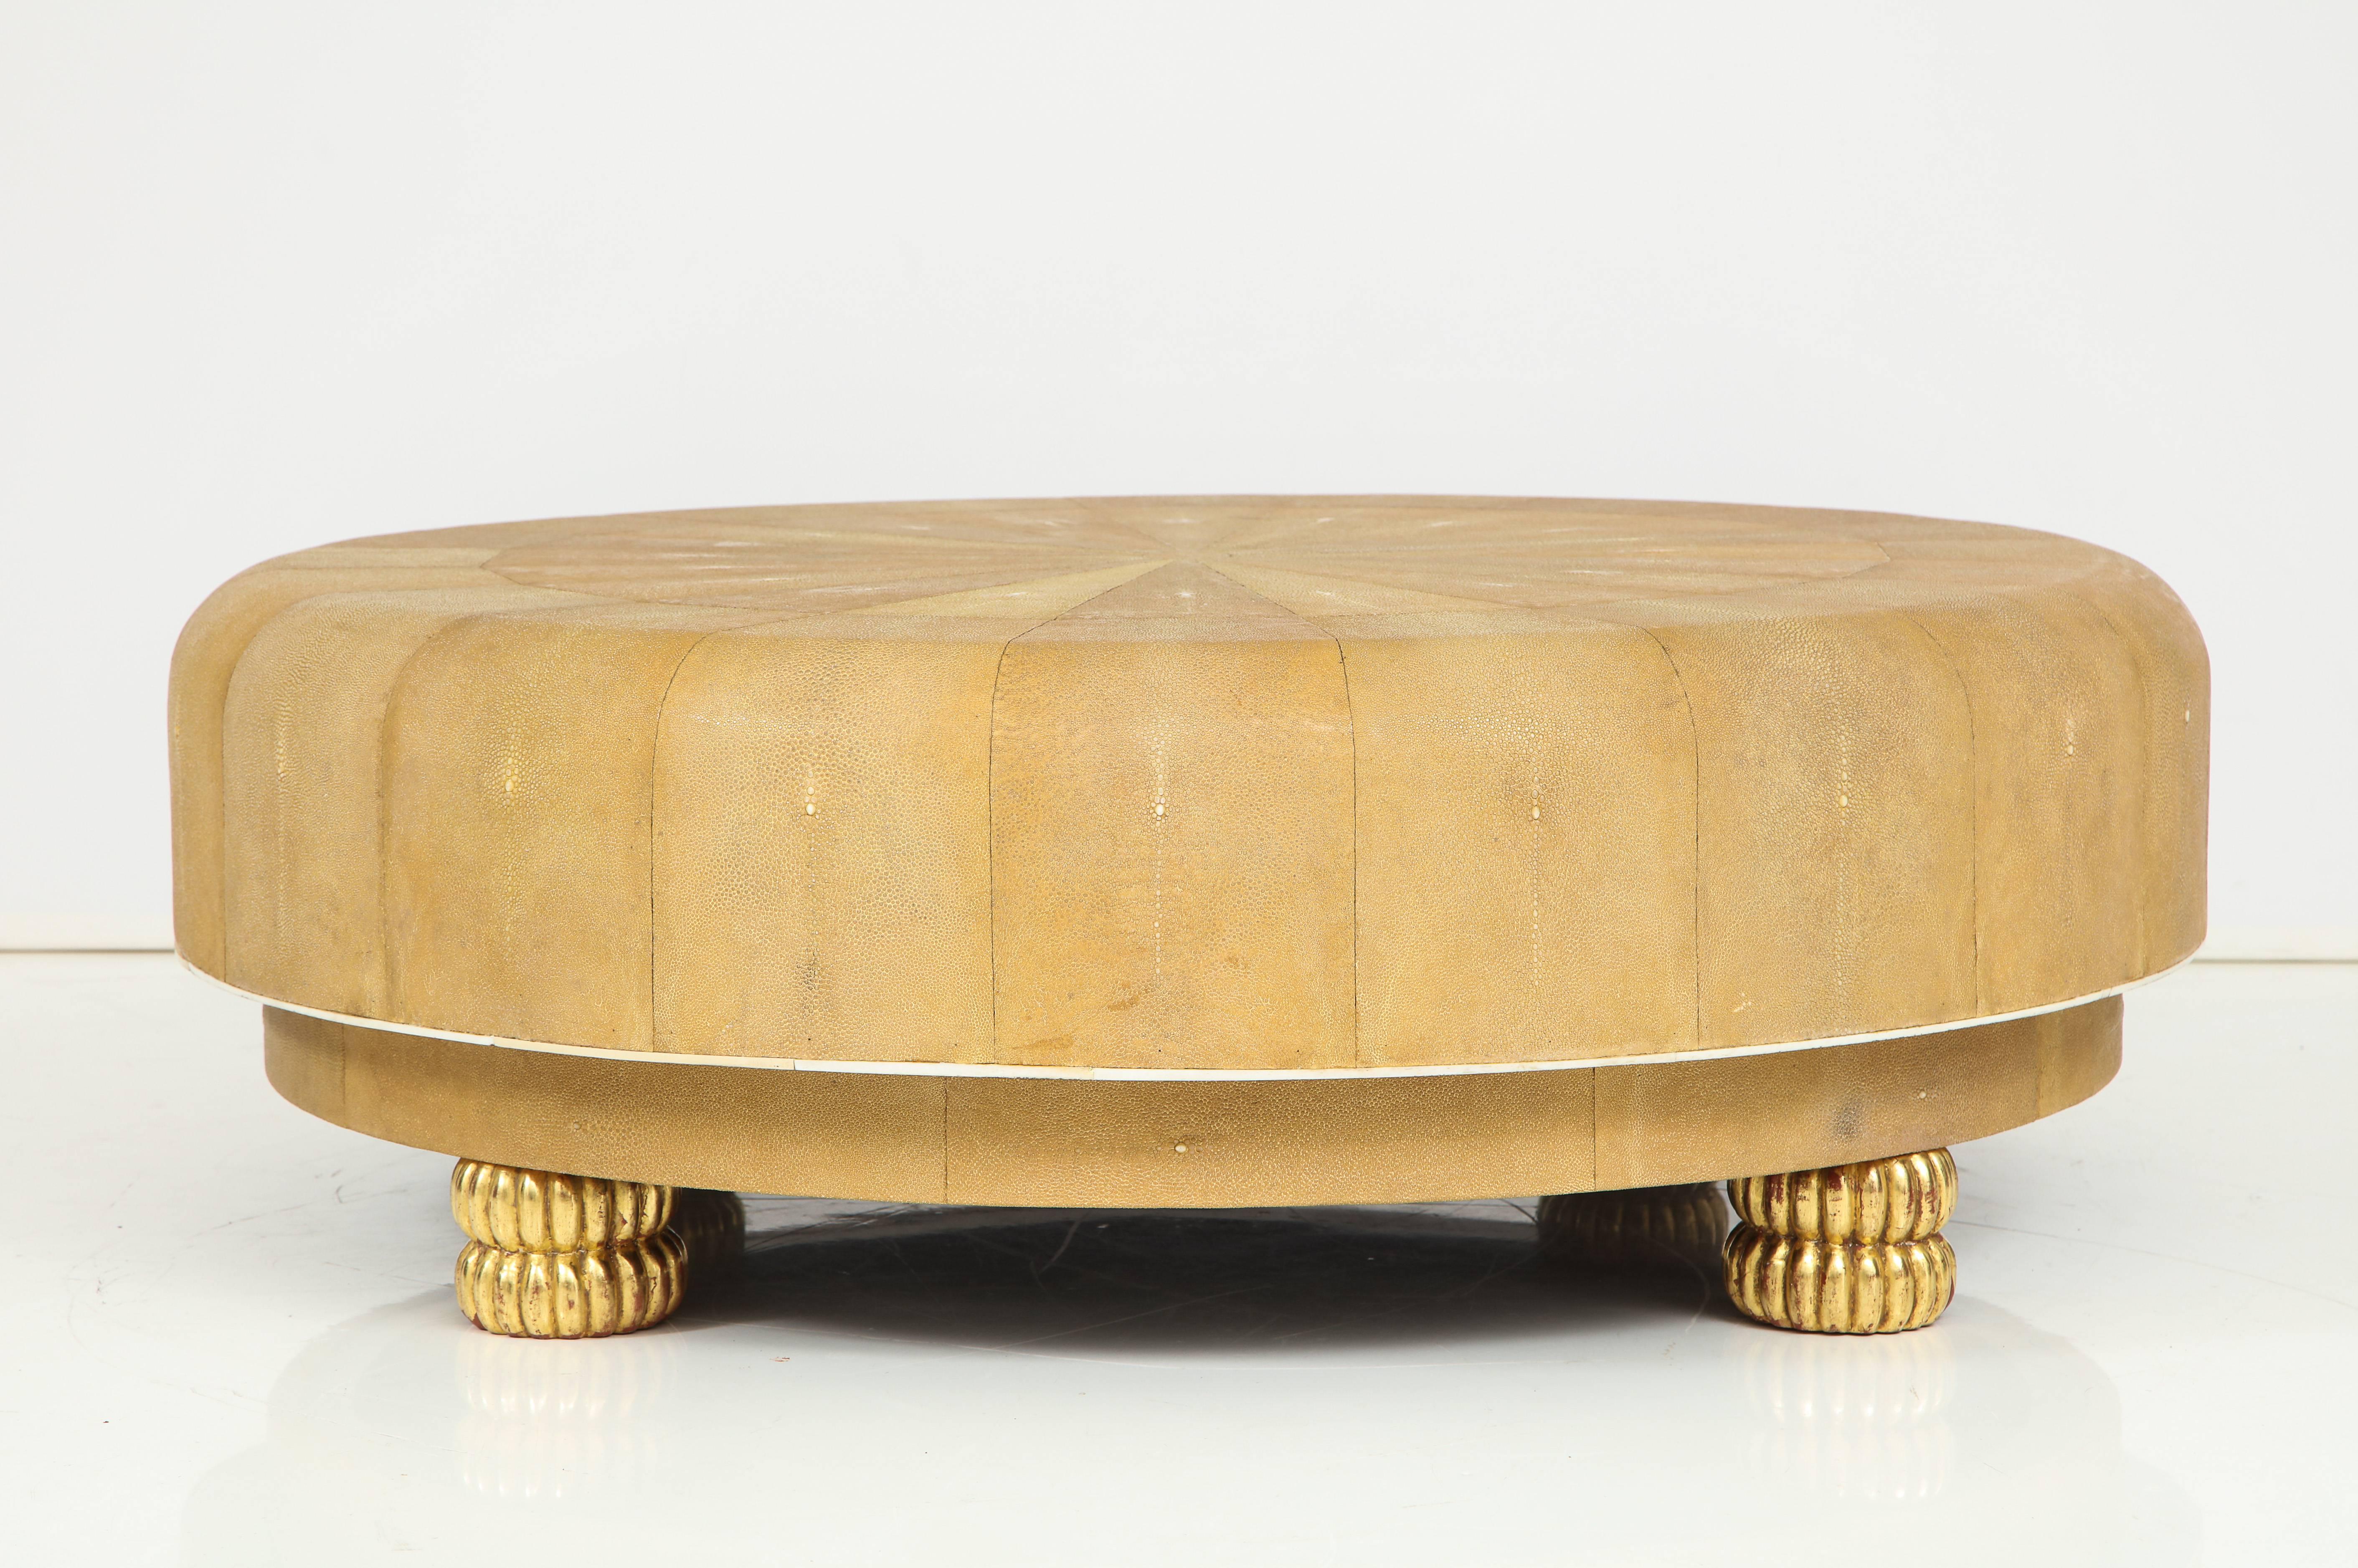 Of circular form, the shagreen with subtle gold lustrous surface and arranged in a natural sunburst pattern. This is an exceptional, custom-made piece from the 1970s Attributed to Karl Springer.
American, 1970s.
Size: 15 1/2